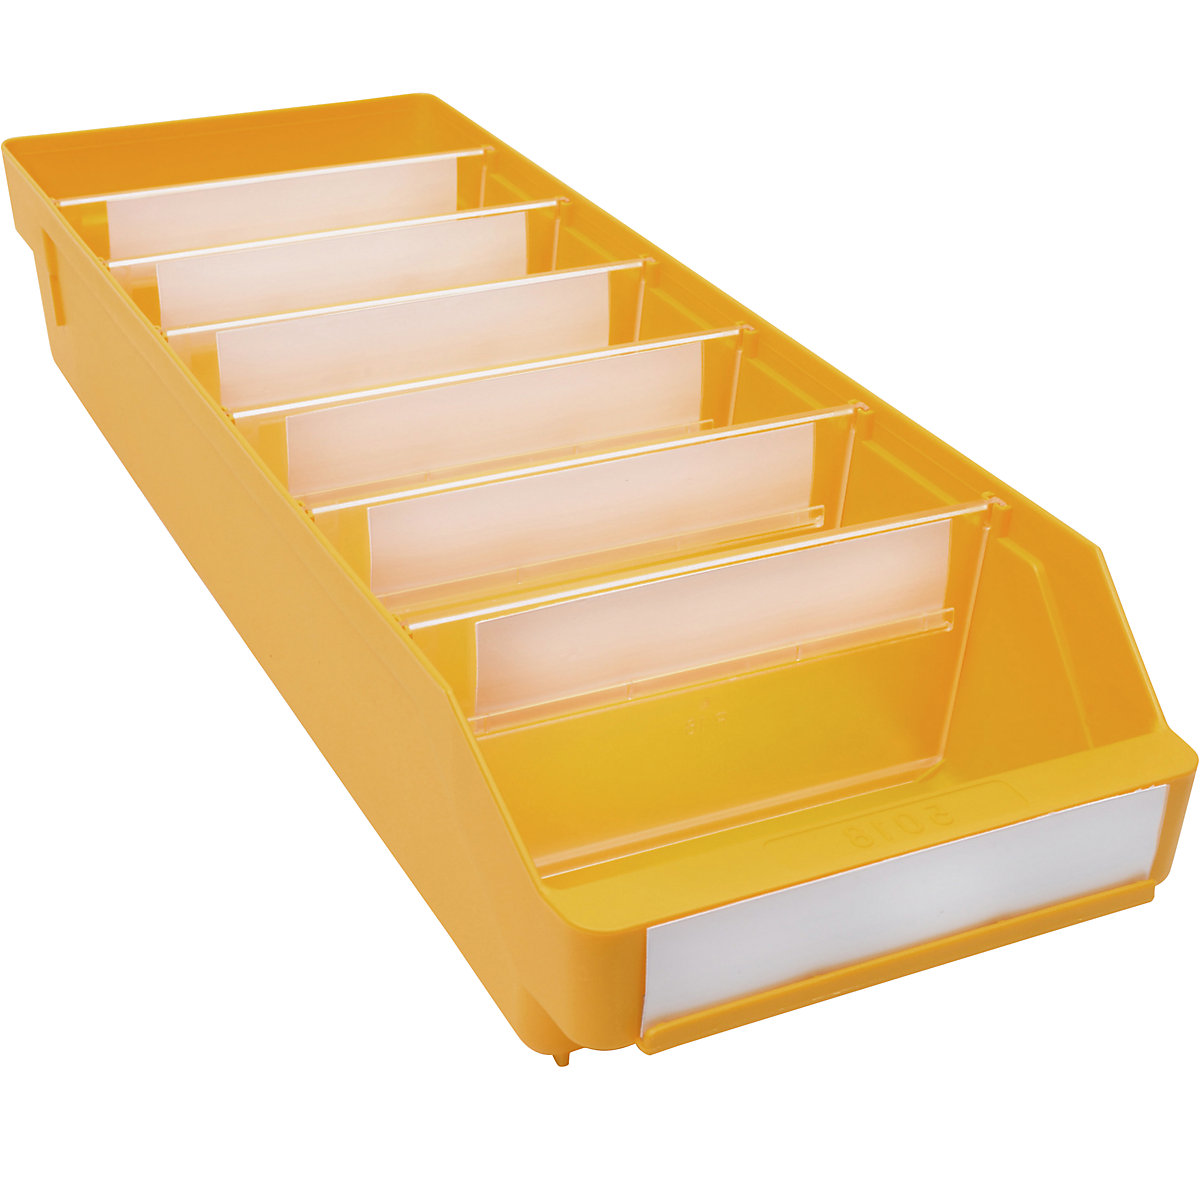 Shelf bin made of highly impact resistant polypropylene – STEMO, yellow, LxWxH 500 x 180 x 95 mm, pack of 20-8